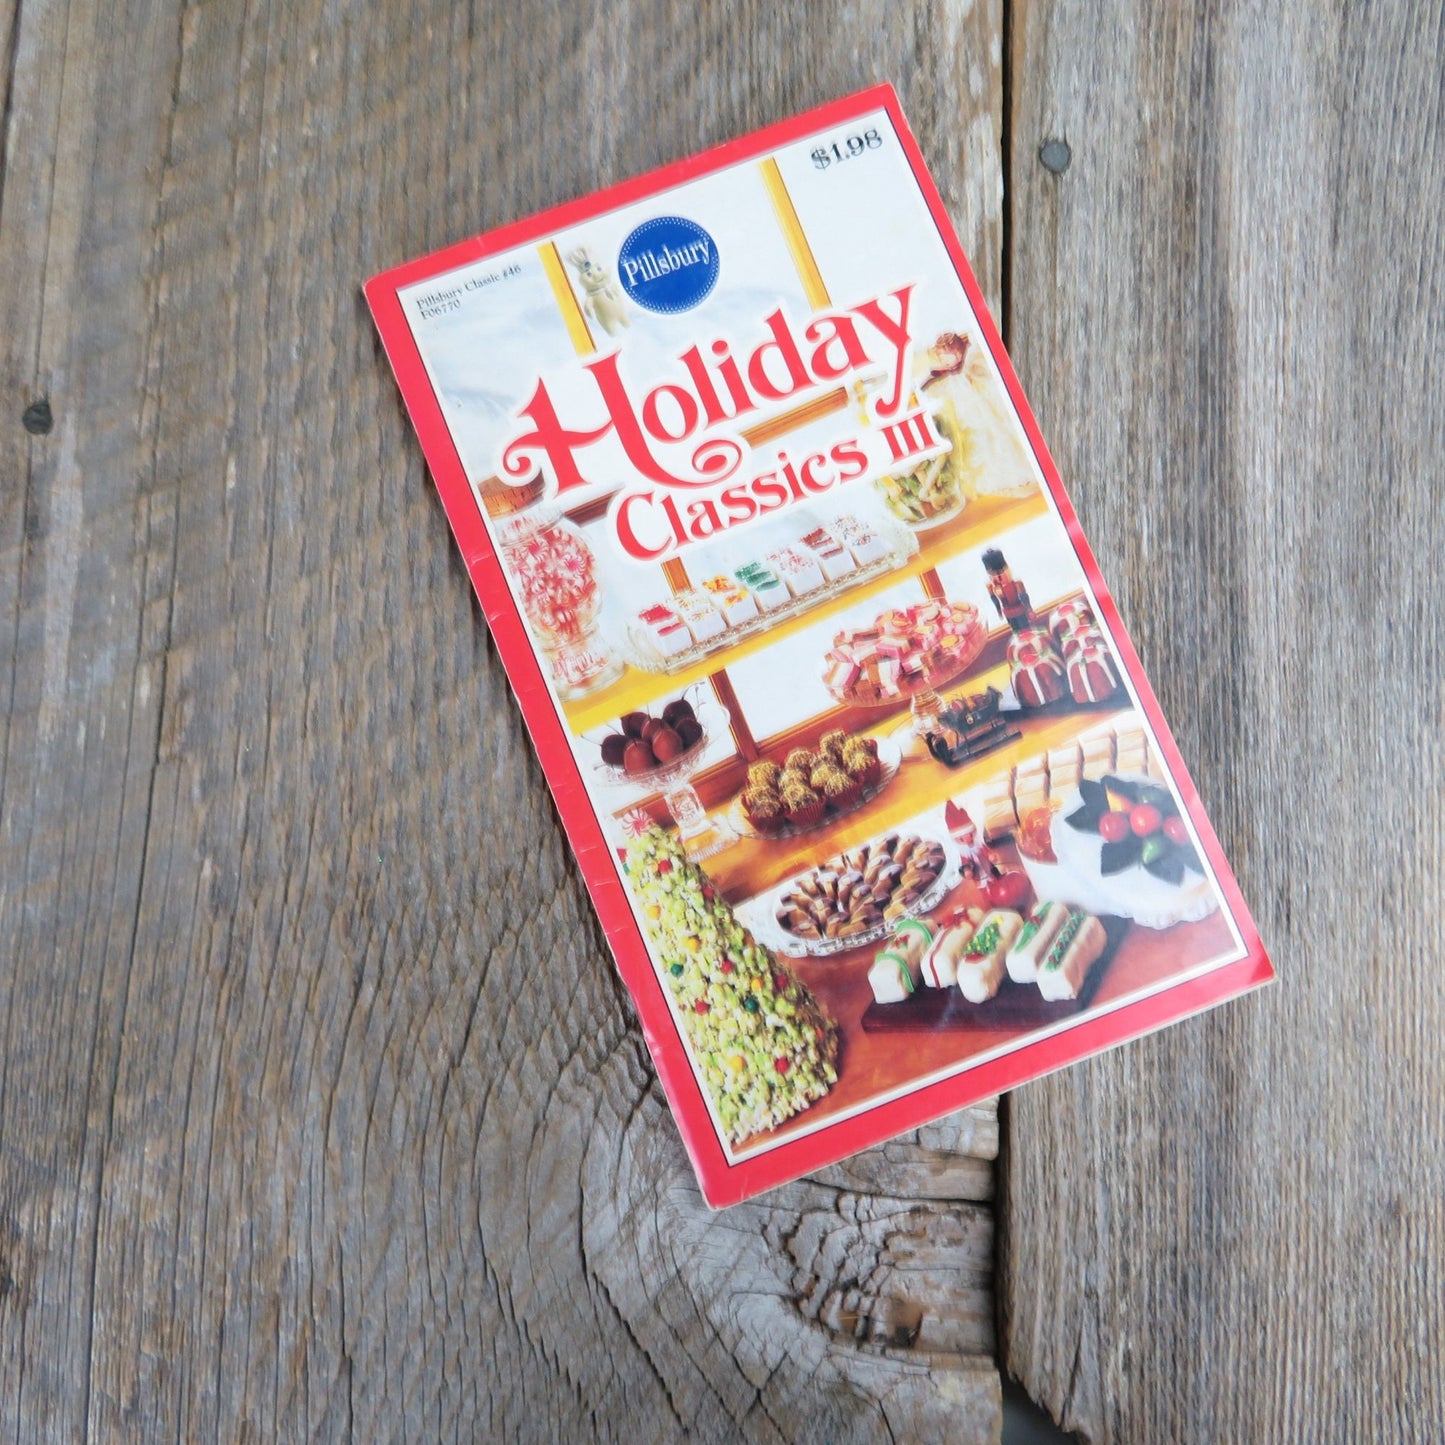 Holiday Classic III Cookbook Pillsbury Christmas Recipes Desserts Paperback Booklet 1984 Grocery Store Pamphlet